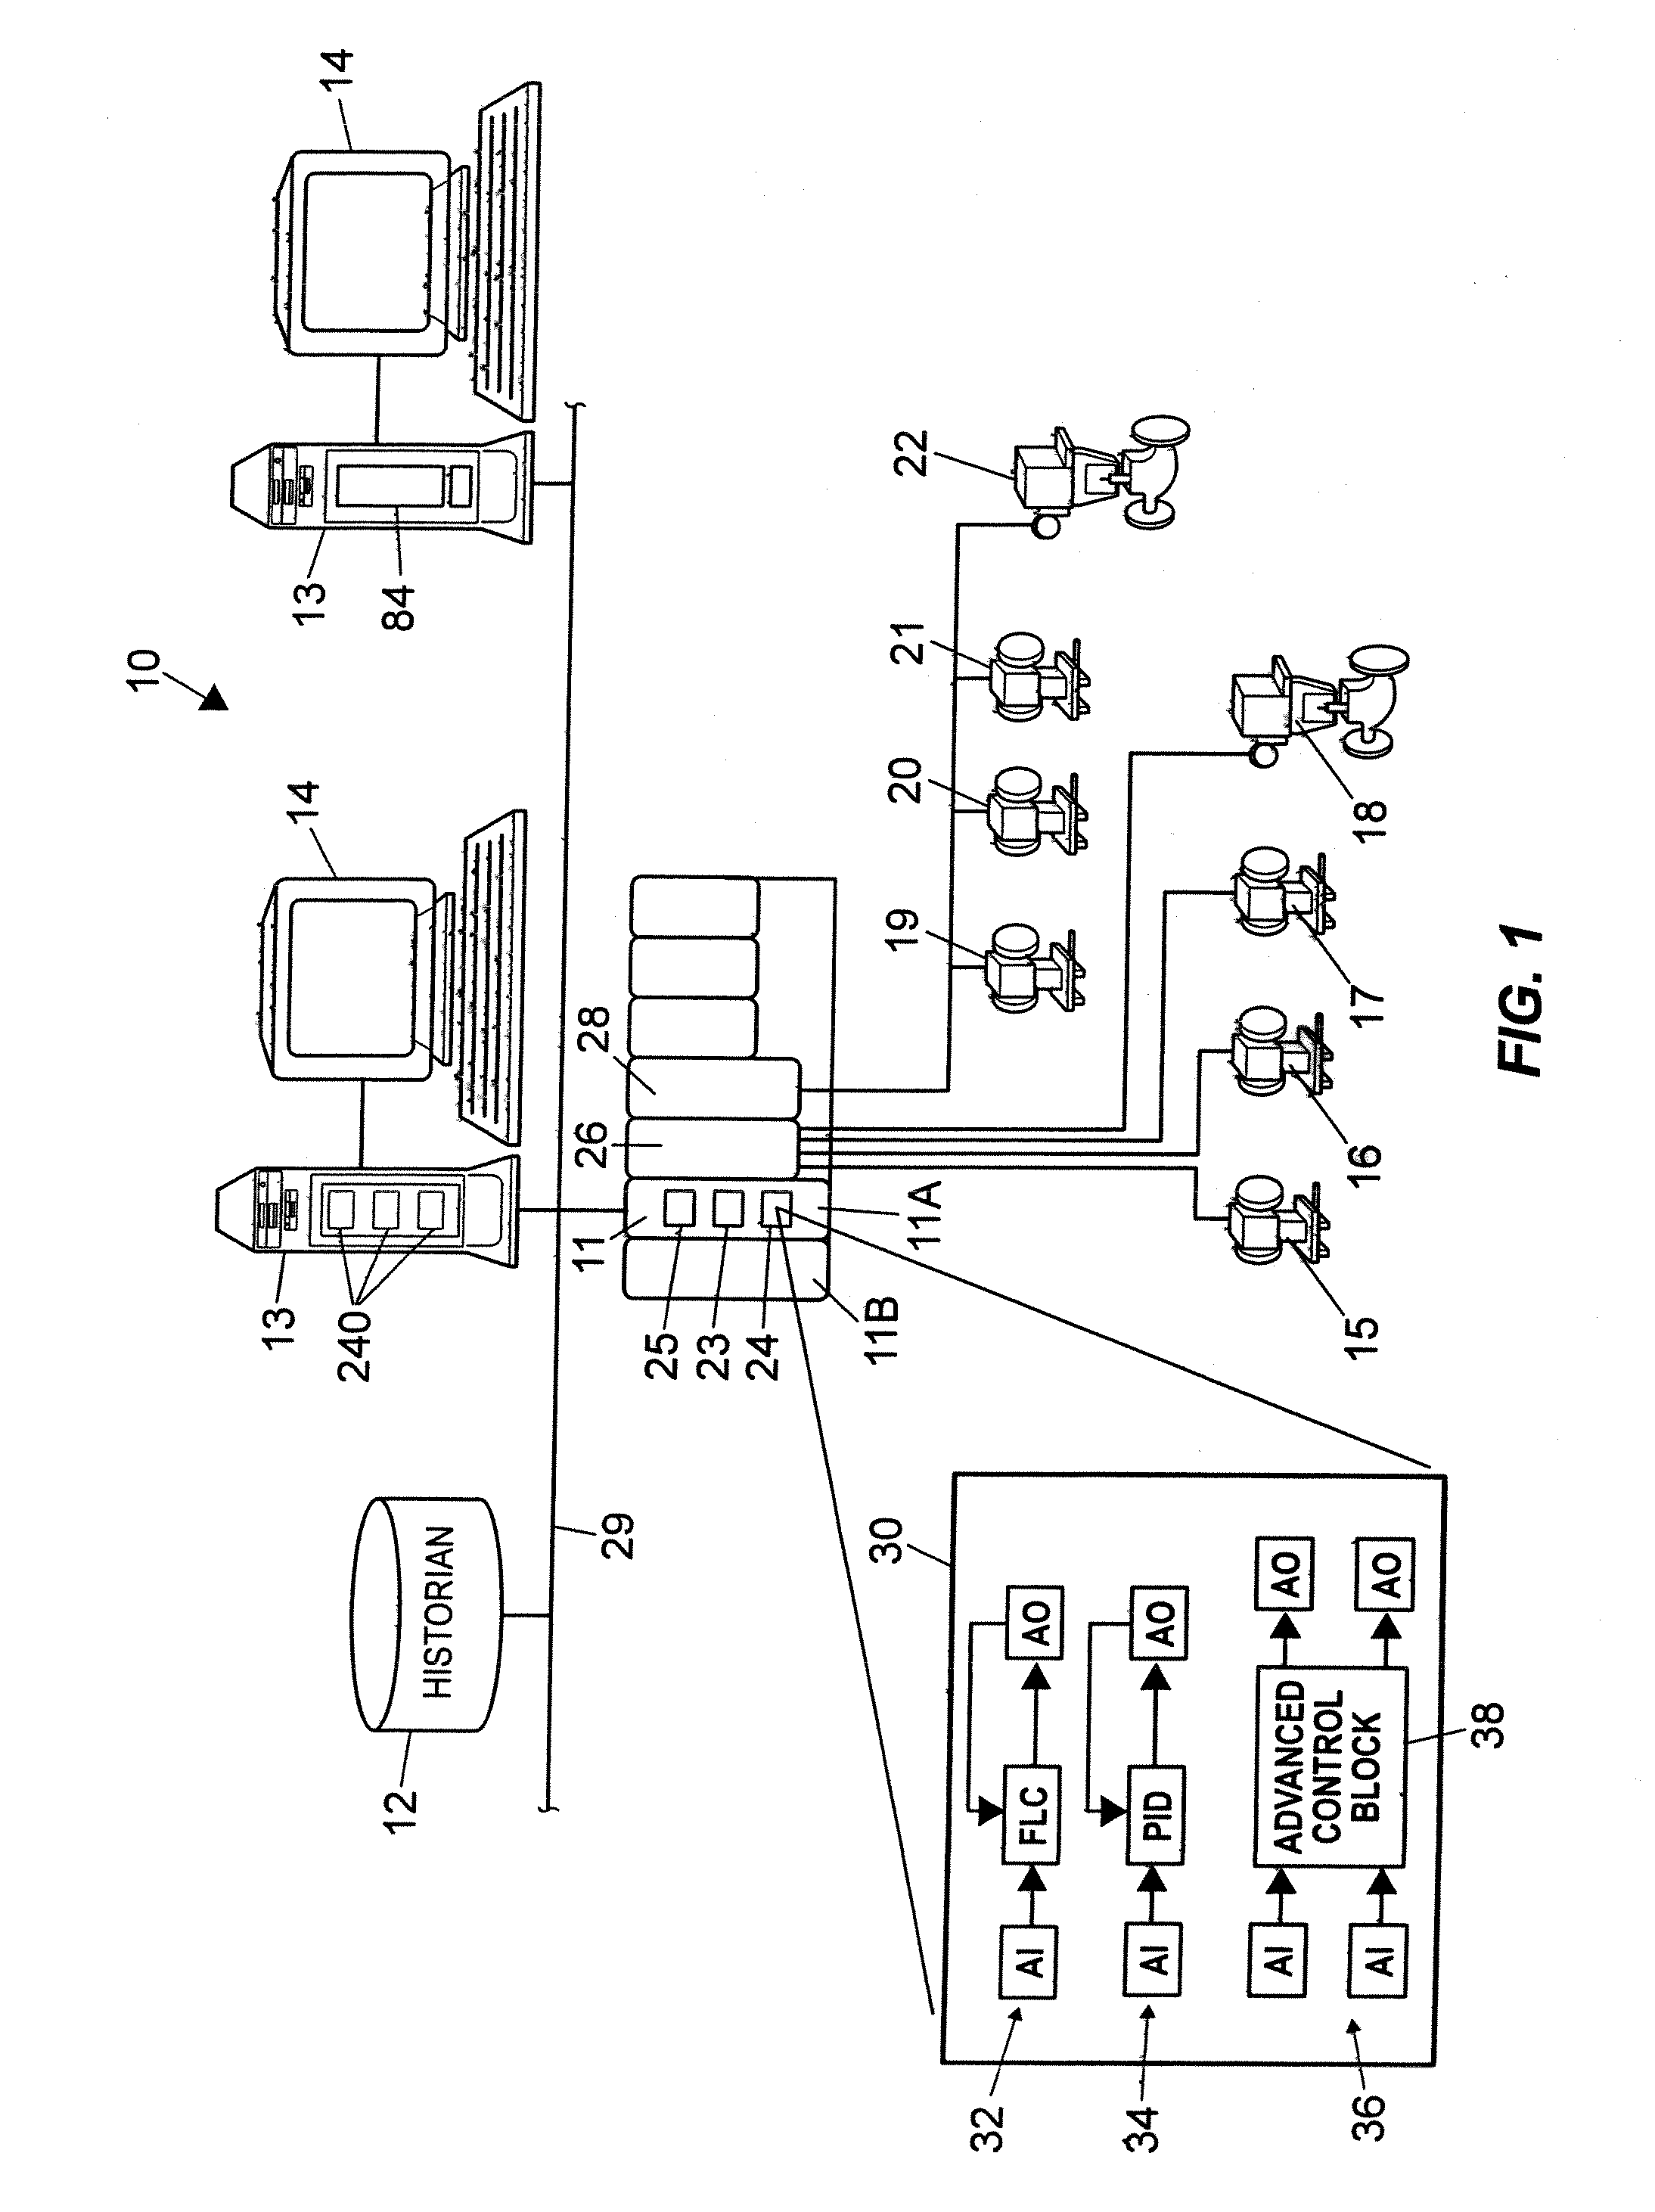 Analytical Server Integrated in a Process Control Network